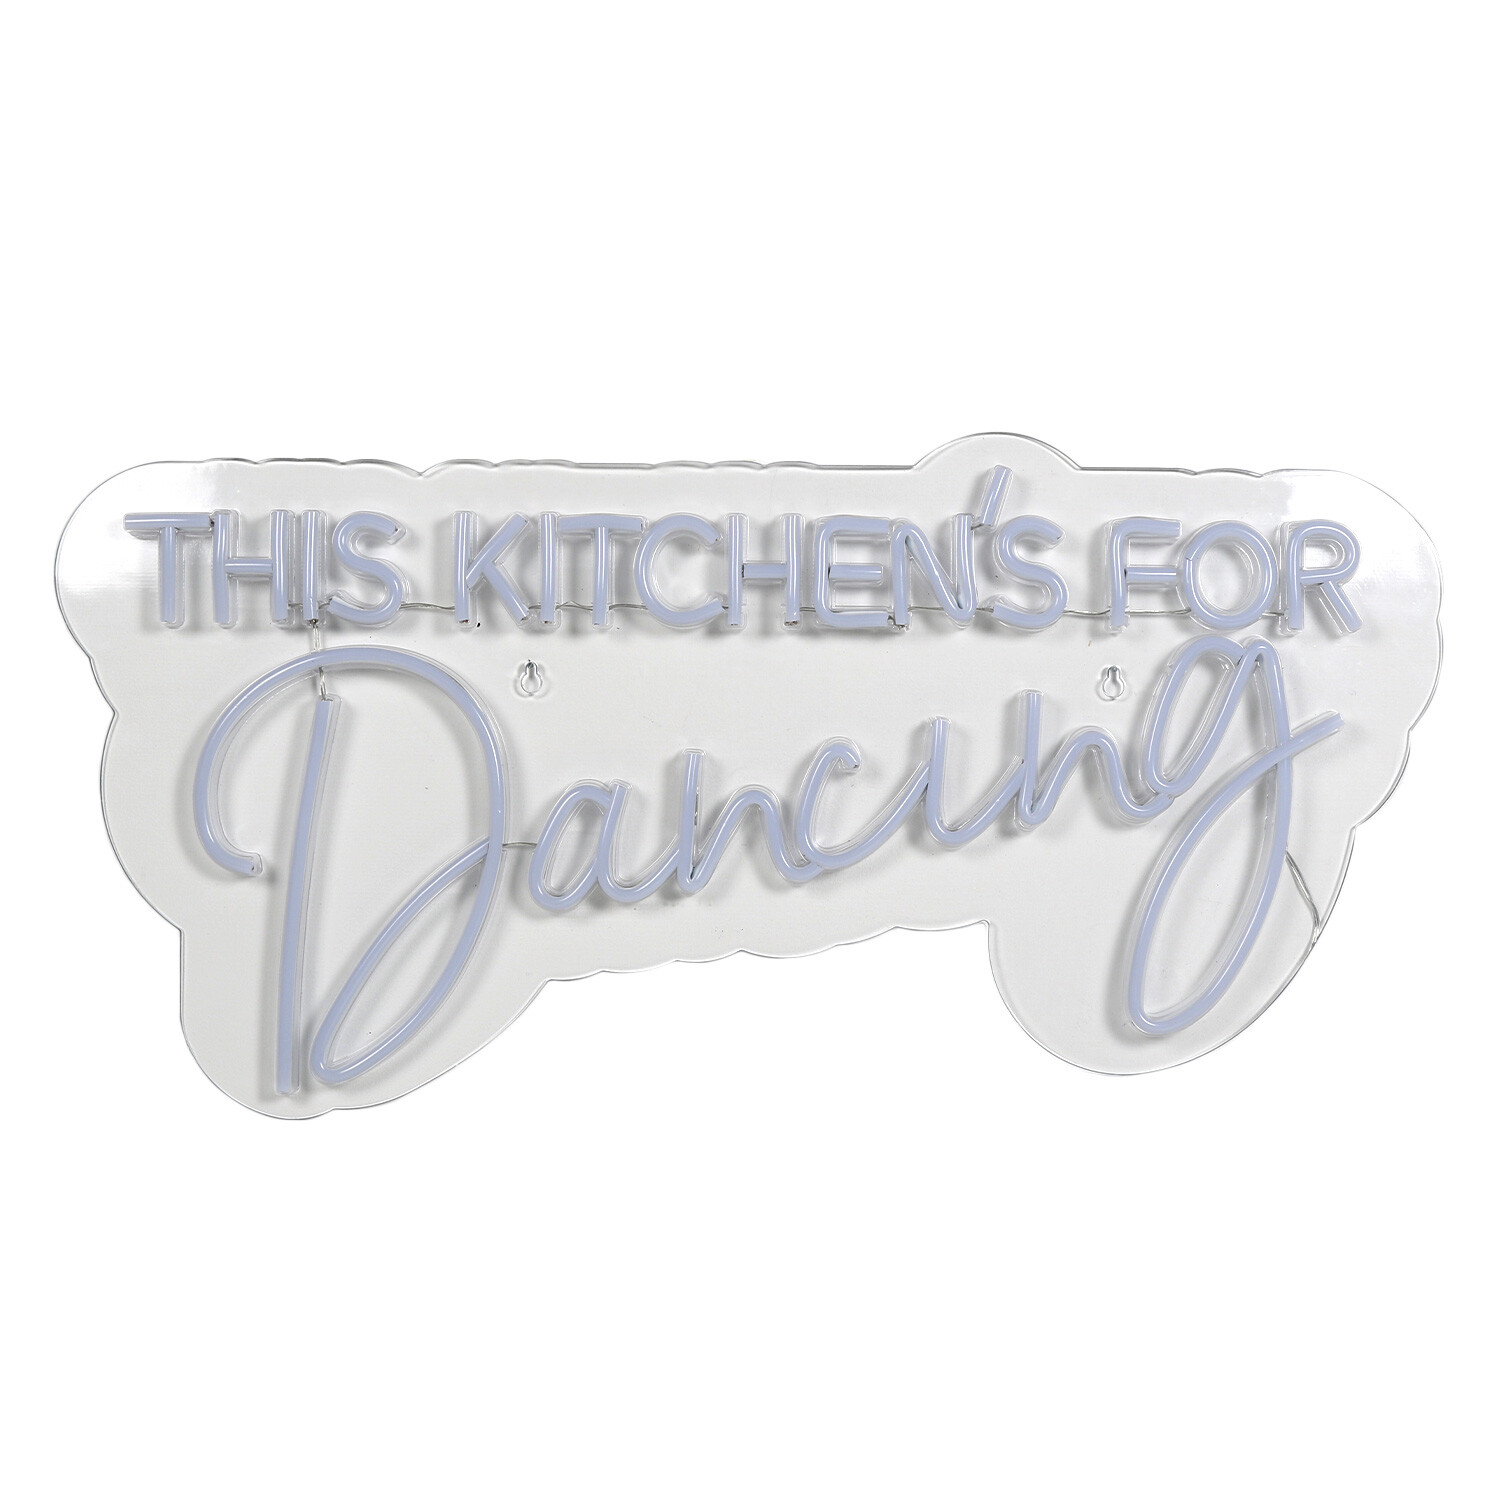 The Kitchens For Dancing LED Neon Sign Light Image 2